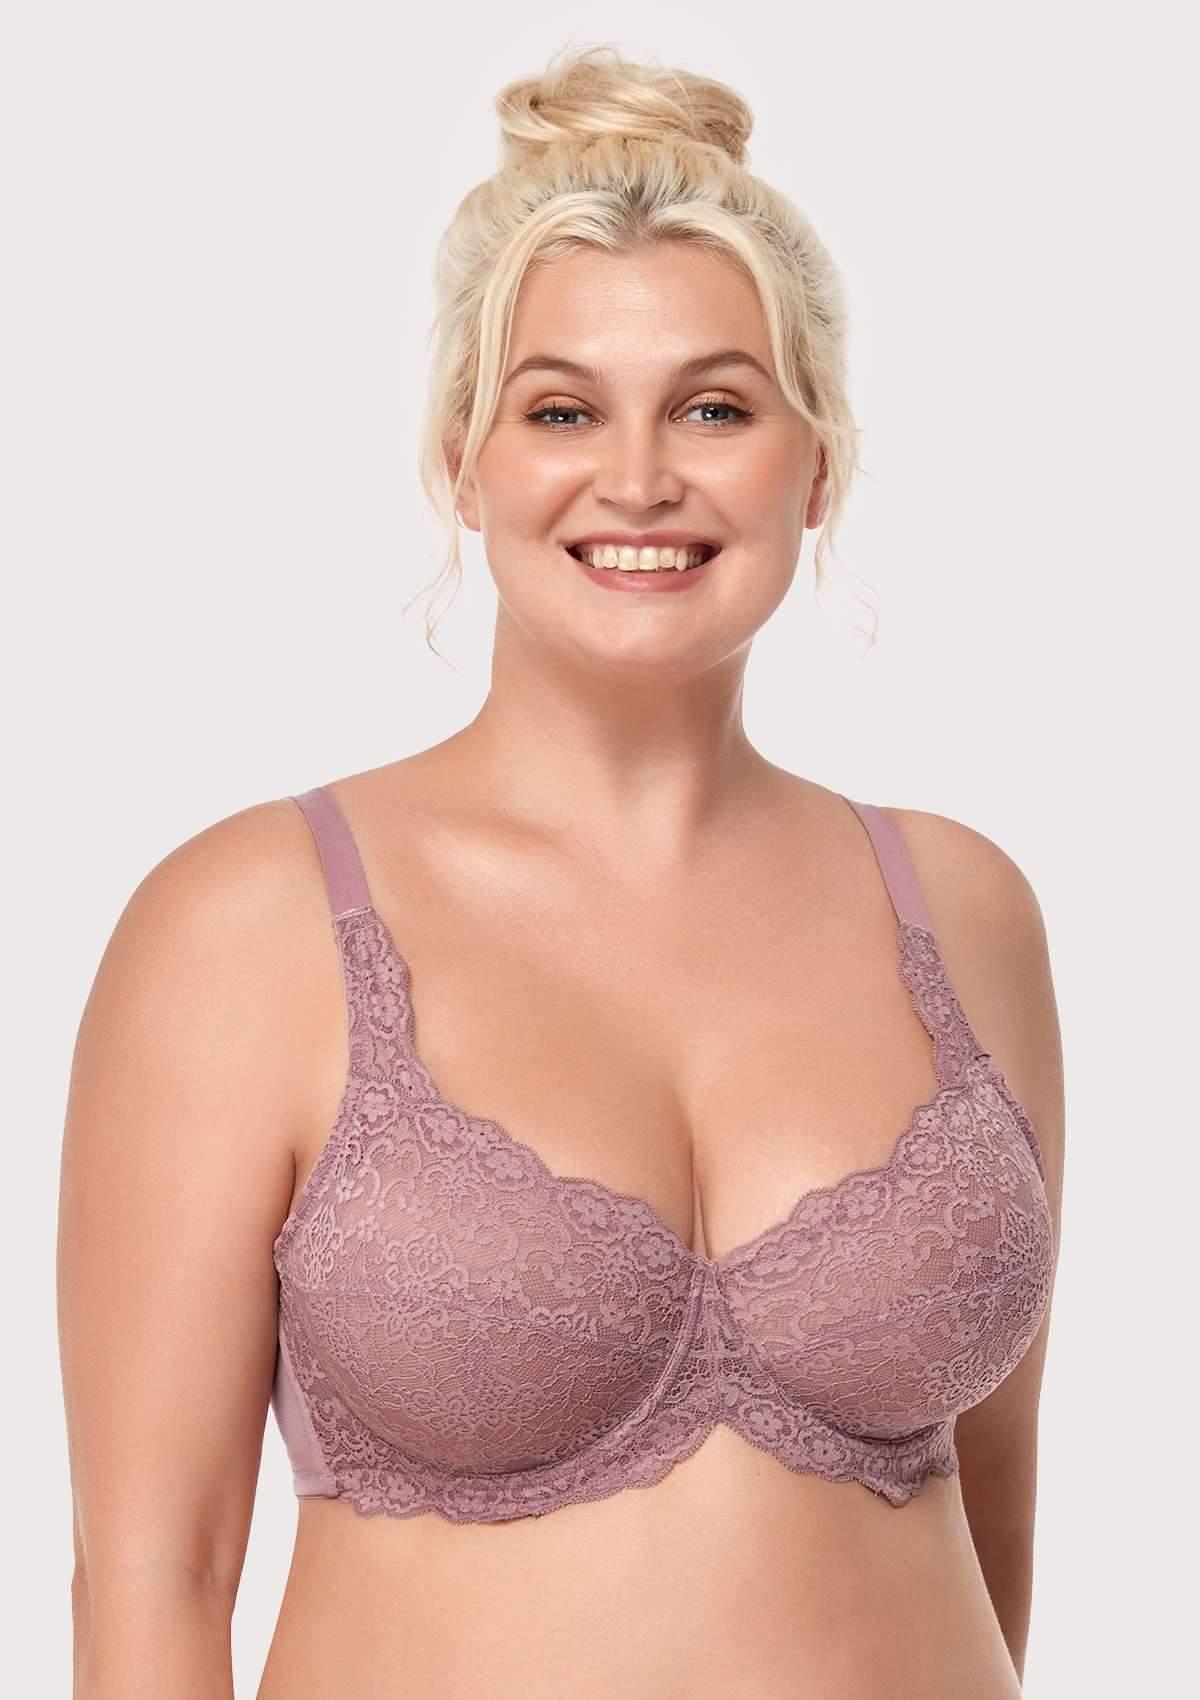 HSIA All-Over Floral Lace Unlined Bra: Minimizer Bra For Heavy Breasts - Purple / 38 / C